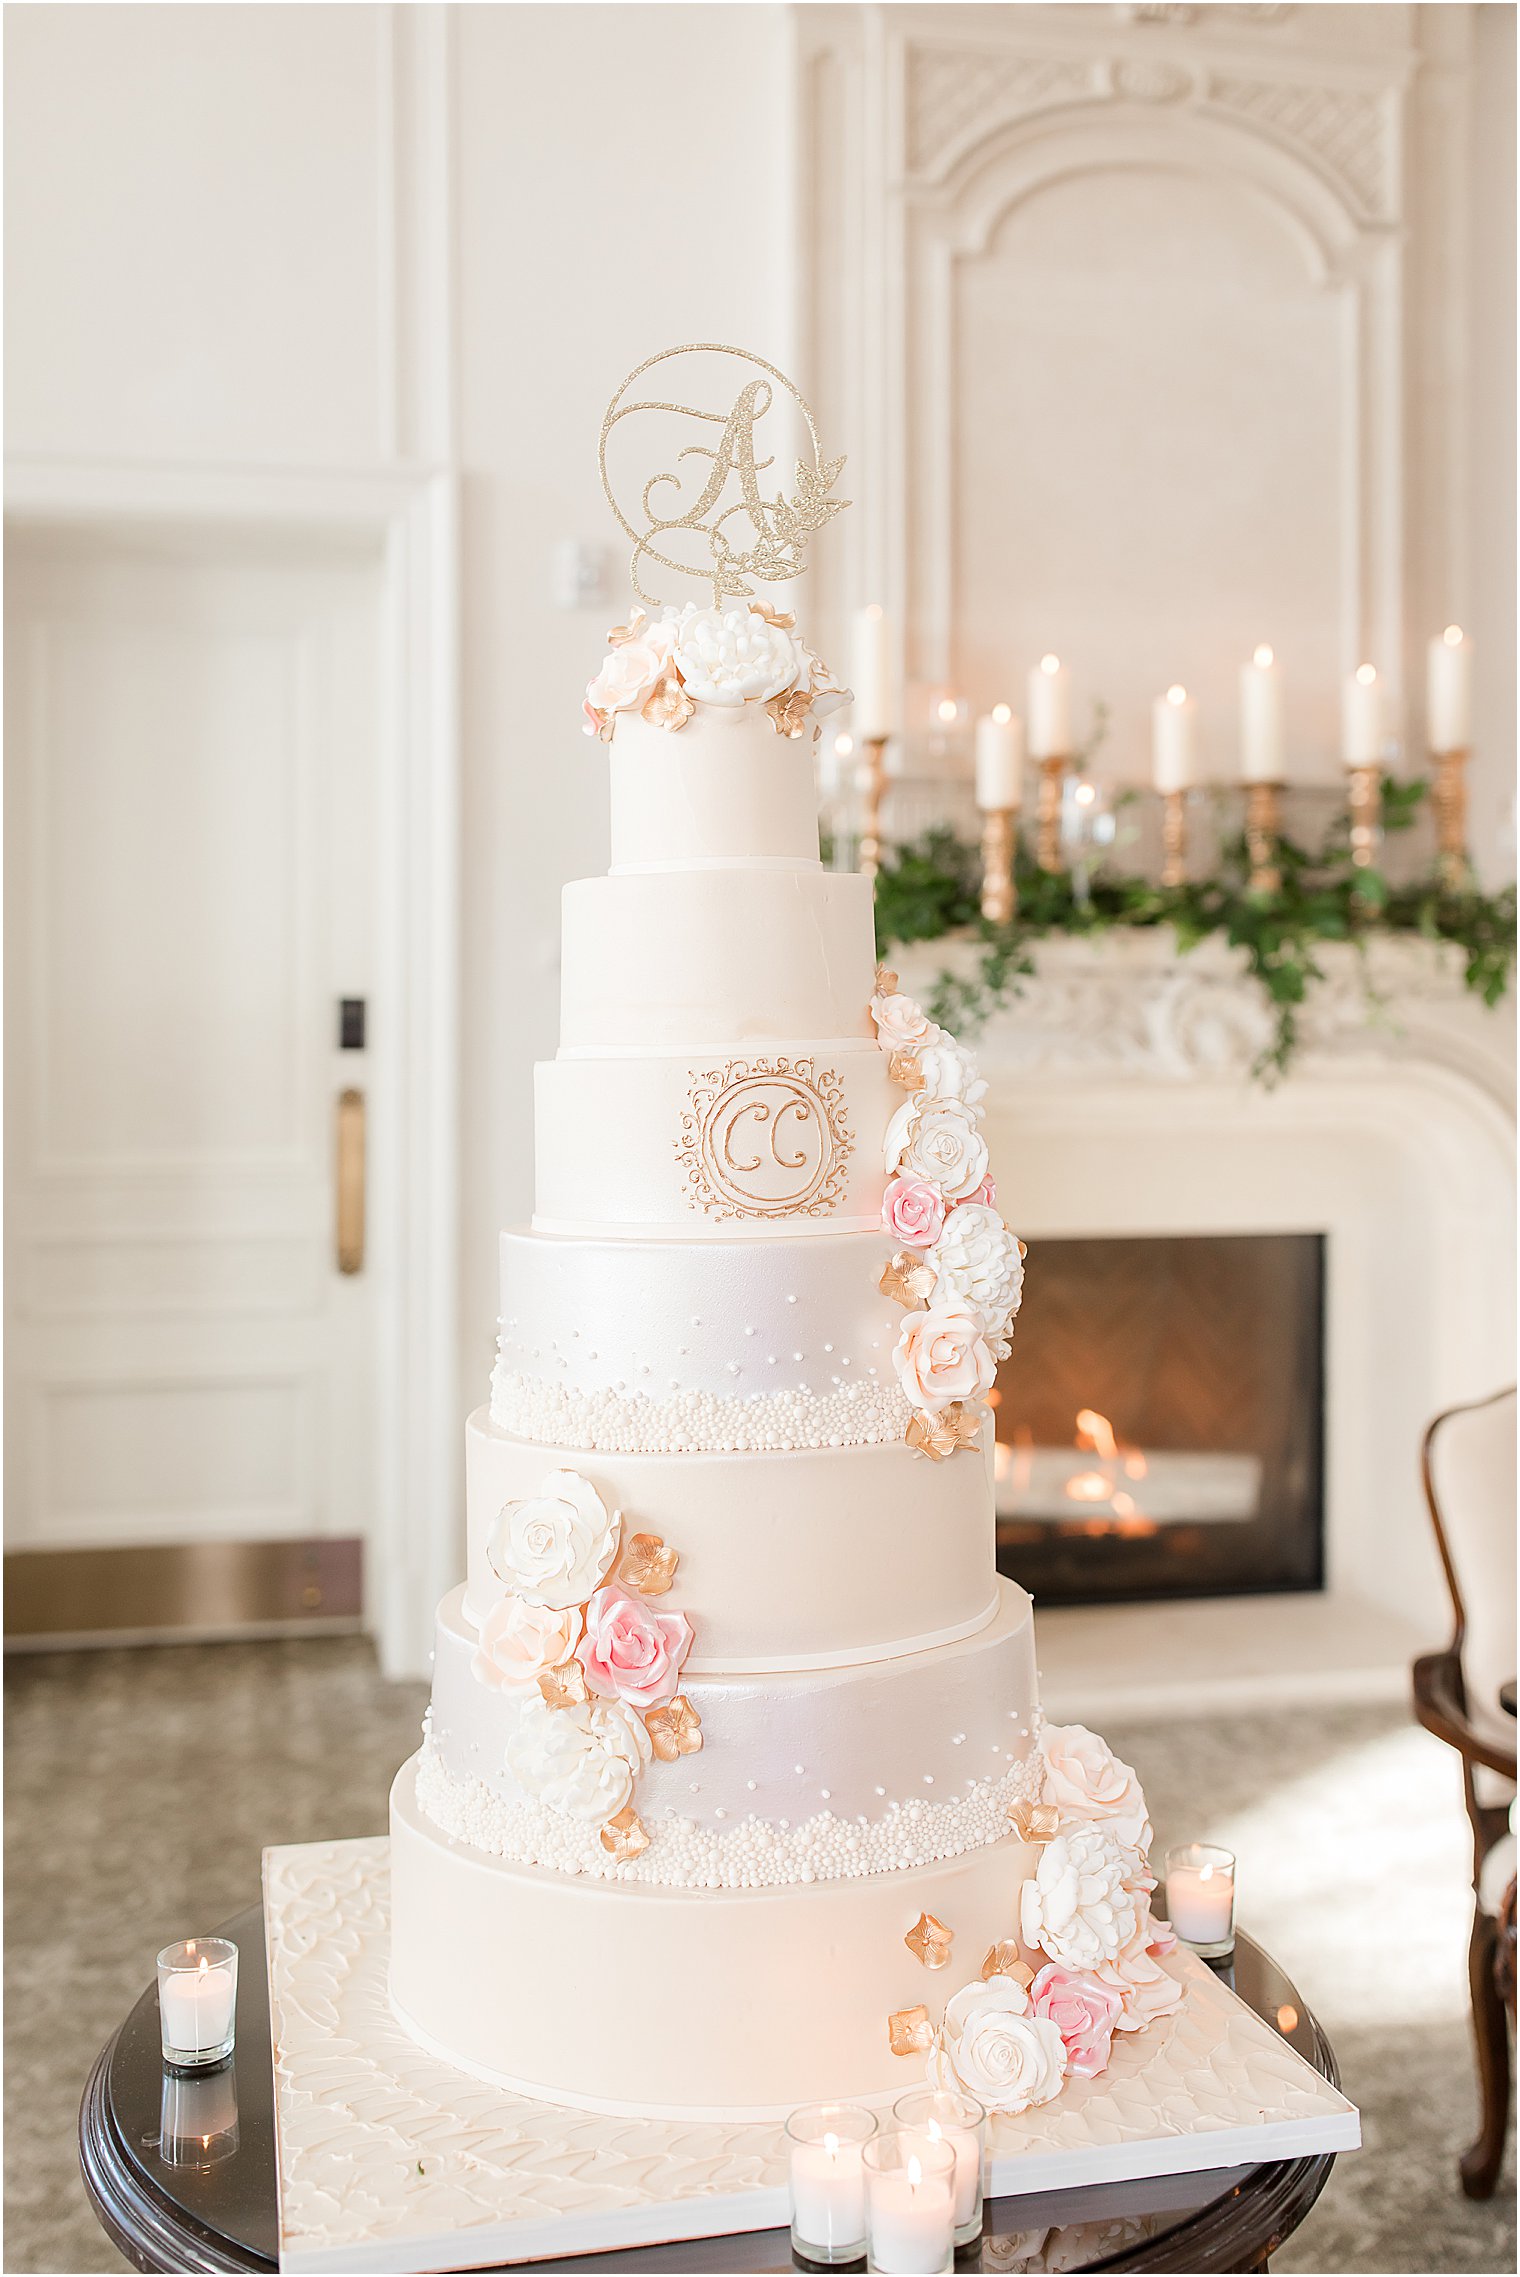 tiered wedding cake with pink and ivory details designed by NJ bakery Palermo's Bakery